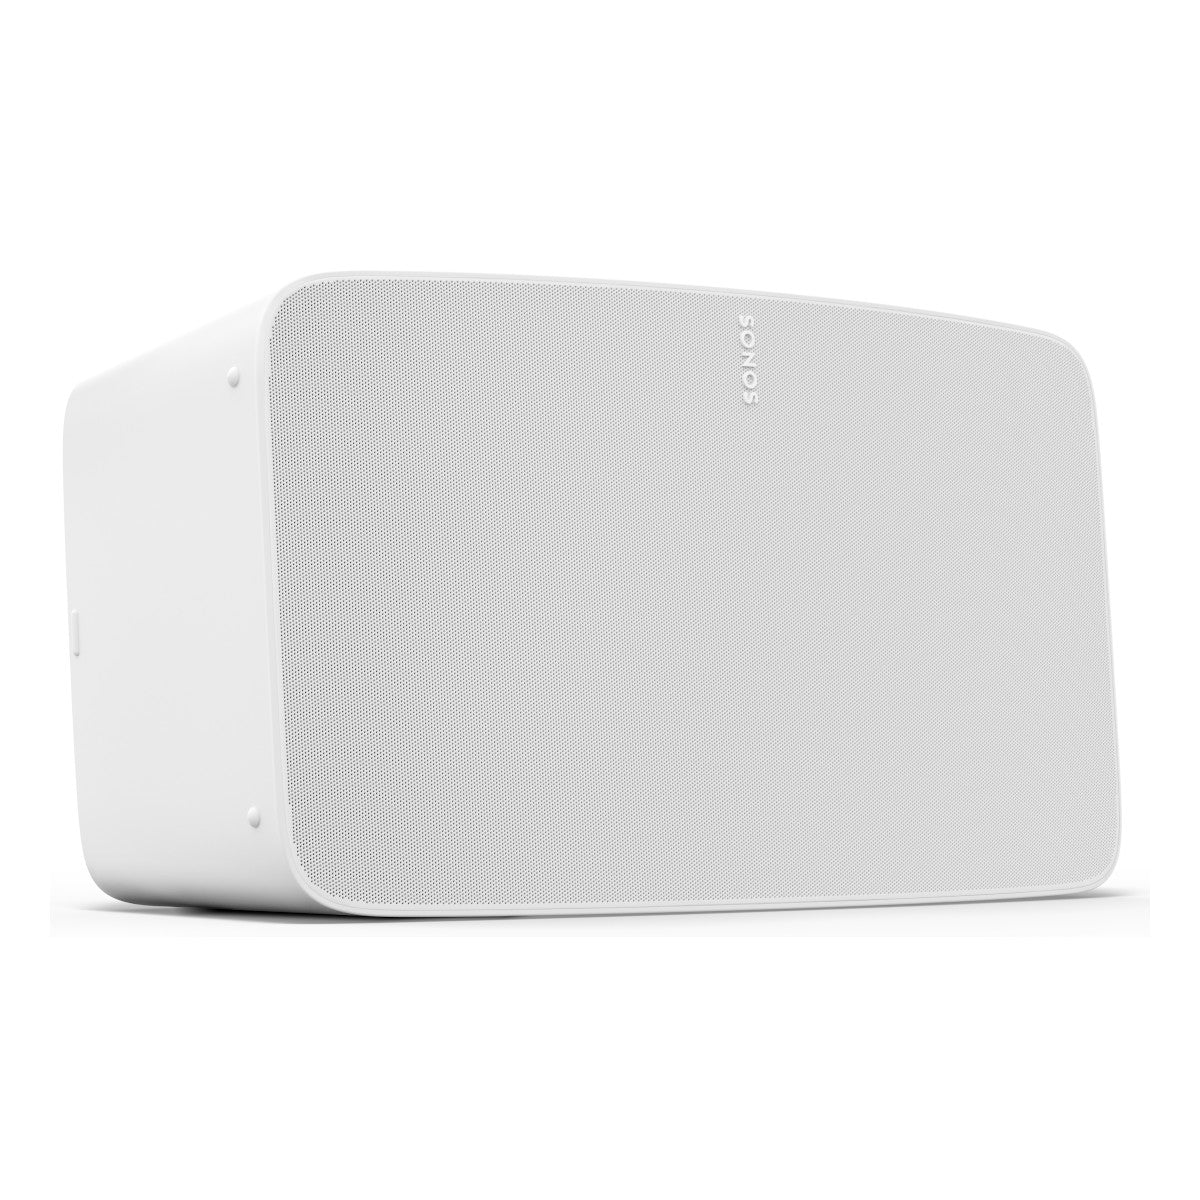 Sonos Five Wireless Speaker for Streaming Music (White) with Flexson Vertical Wall Mount (White) - Pair